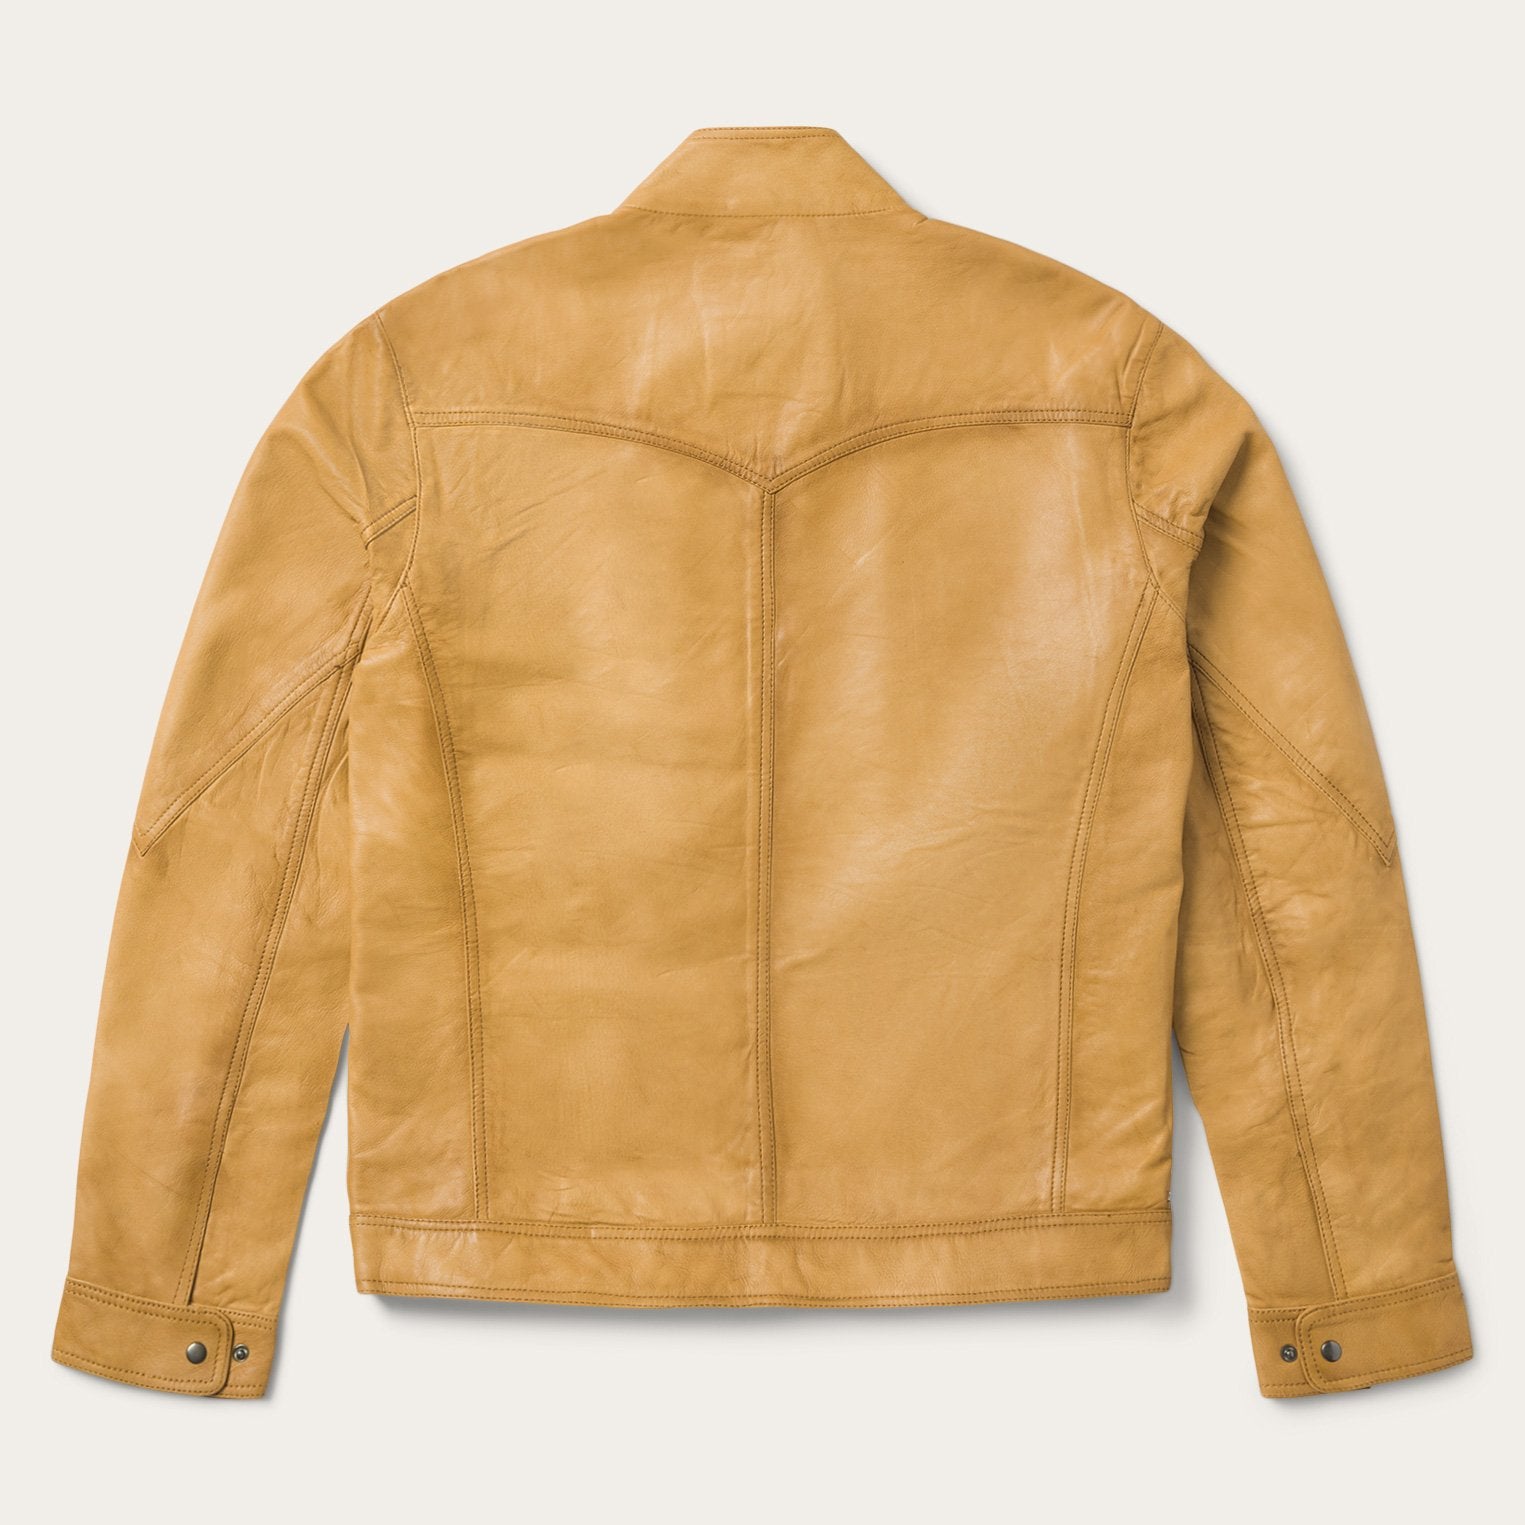 Vintage Buttery Soft Leather Jacket – 8th & Main